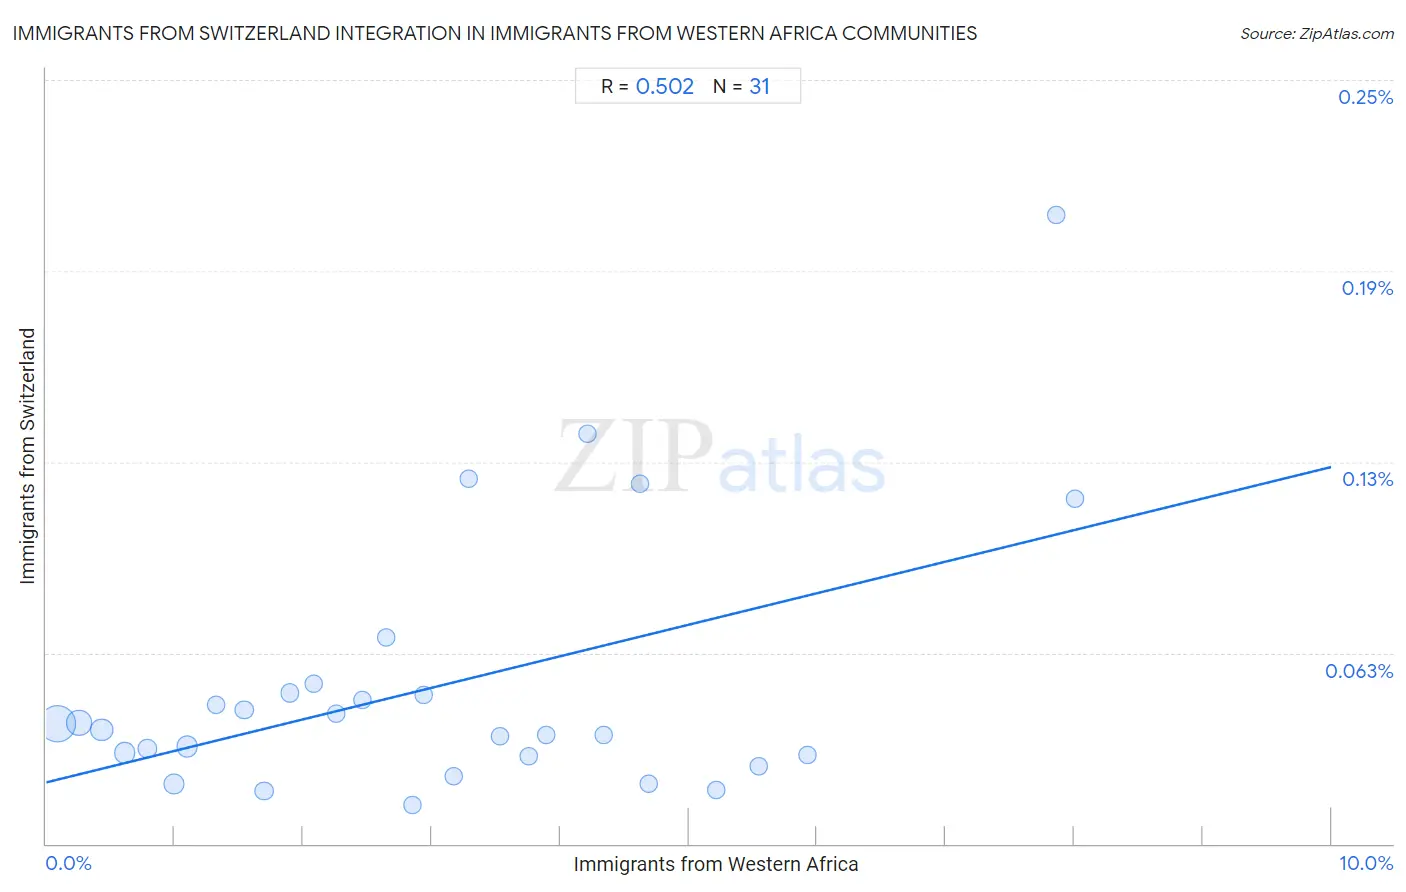 Immigrants from Western Africa Integration in Immigrants from Switzerland Communities